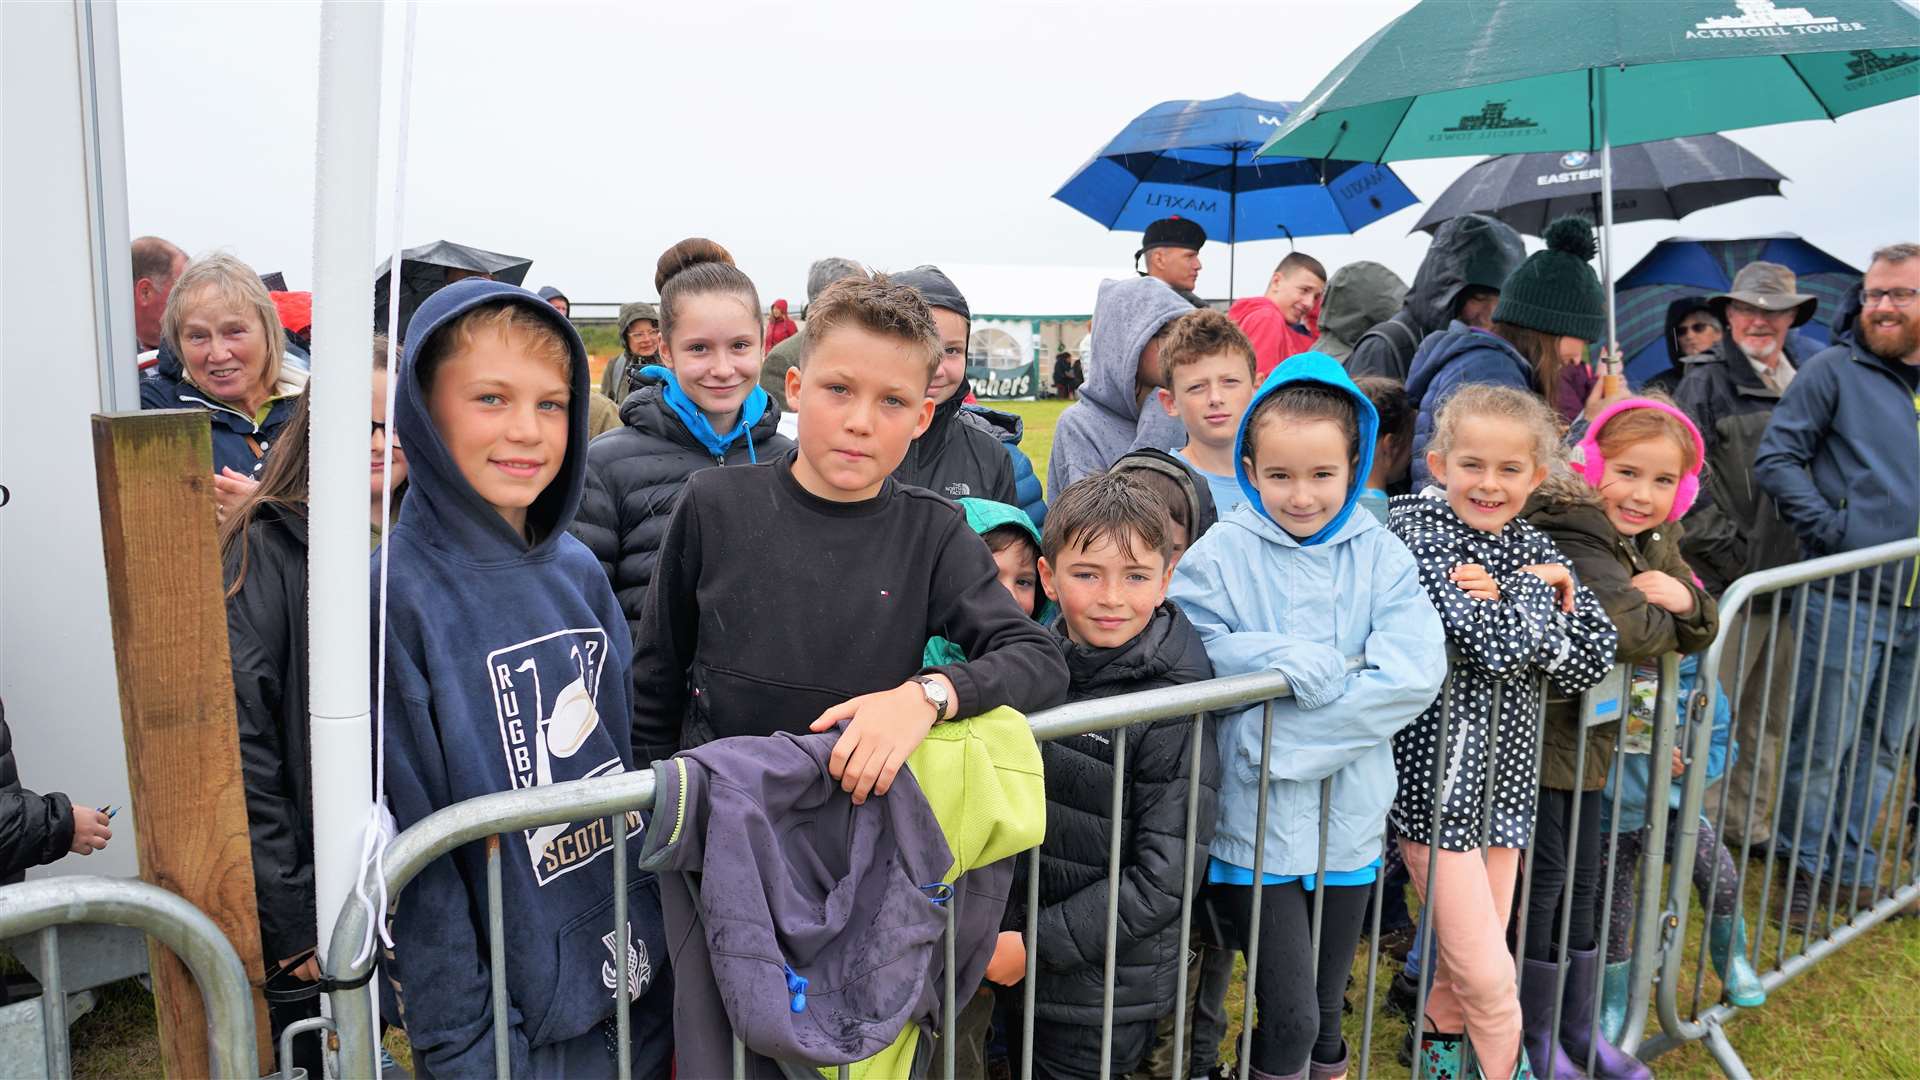 Some of the spectators who braved the rain at Mey Highland Games 2022. Picture: DGS